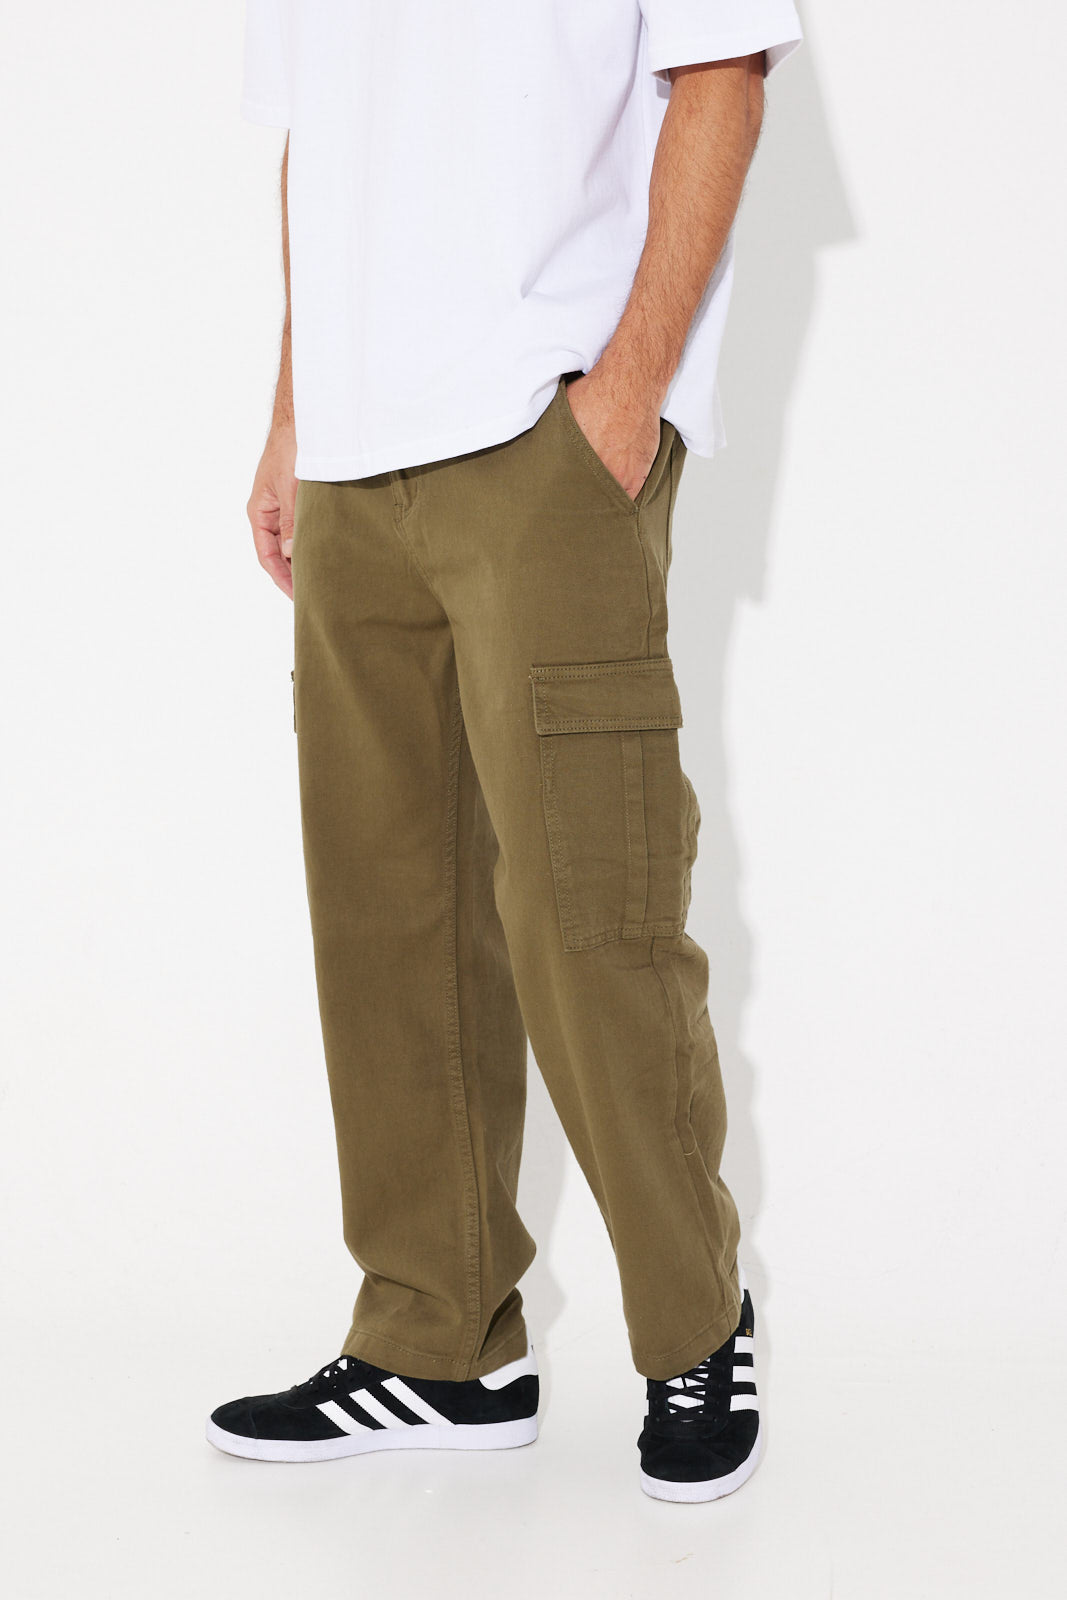 Ryder Baggy Pants Army - FINAL SALE